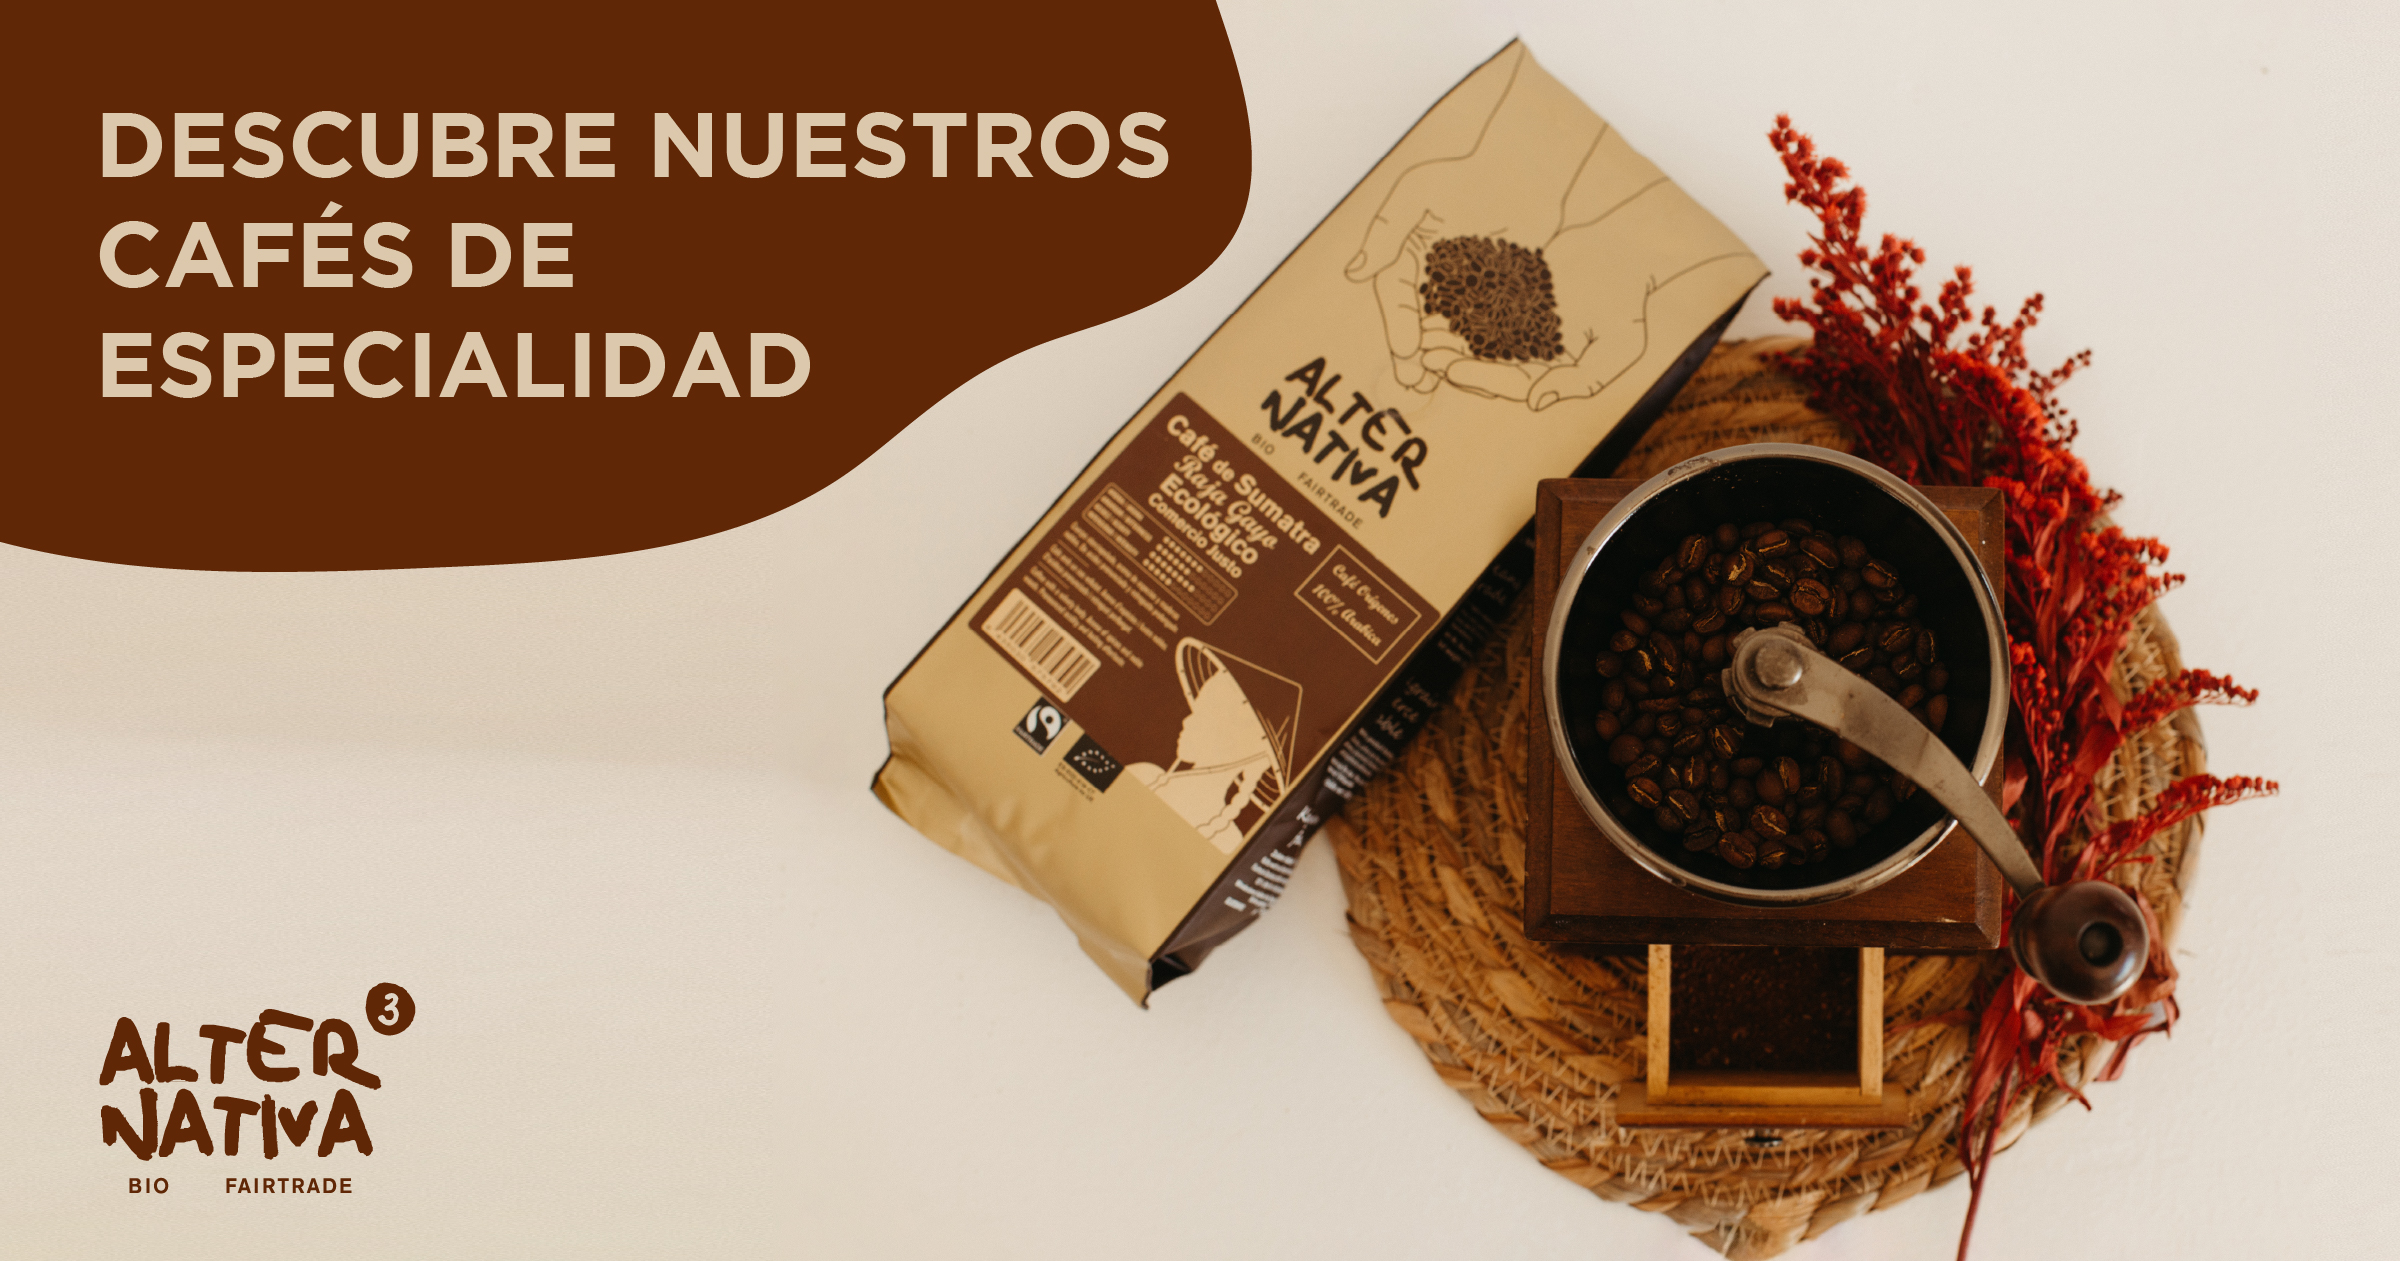 Find out more about our specialty coffees